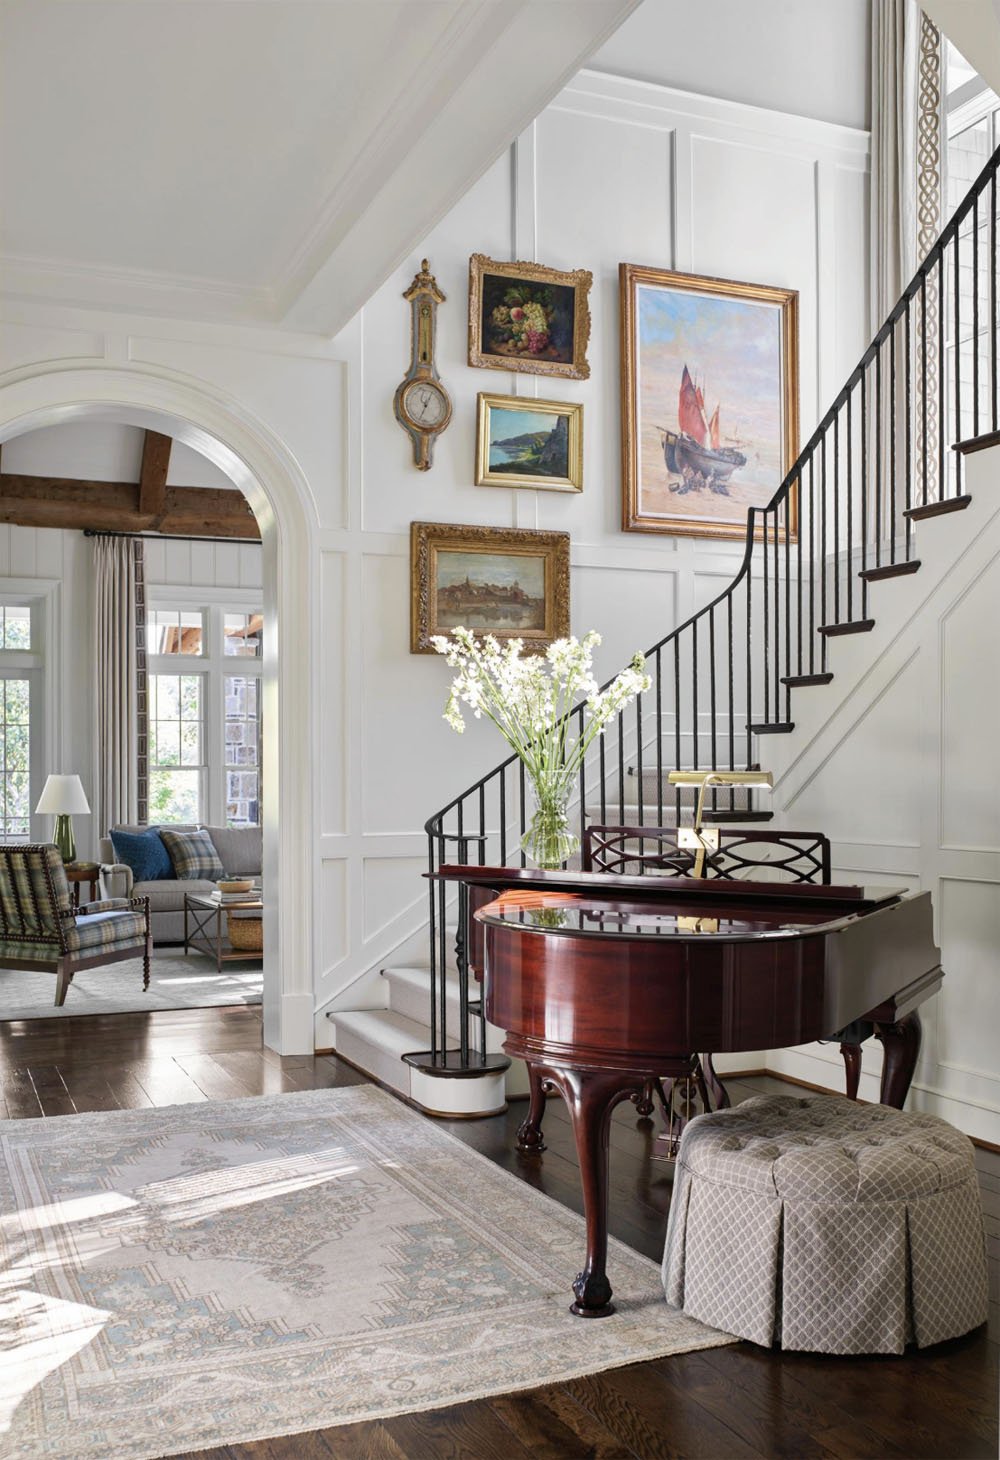 Stair Hall with Custom Millwork in a Classic Grid Pattern